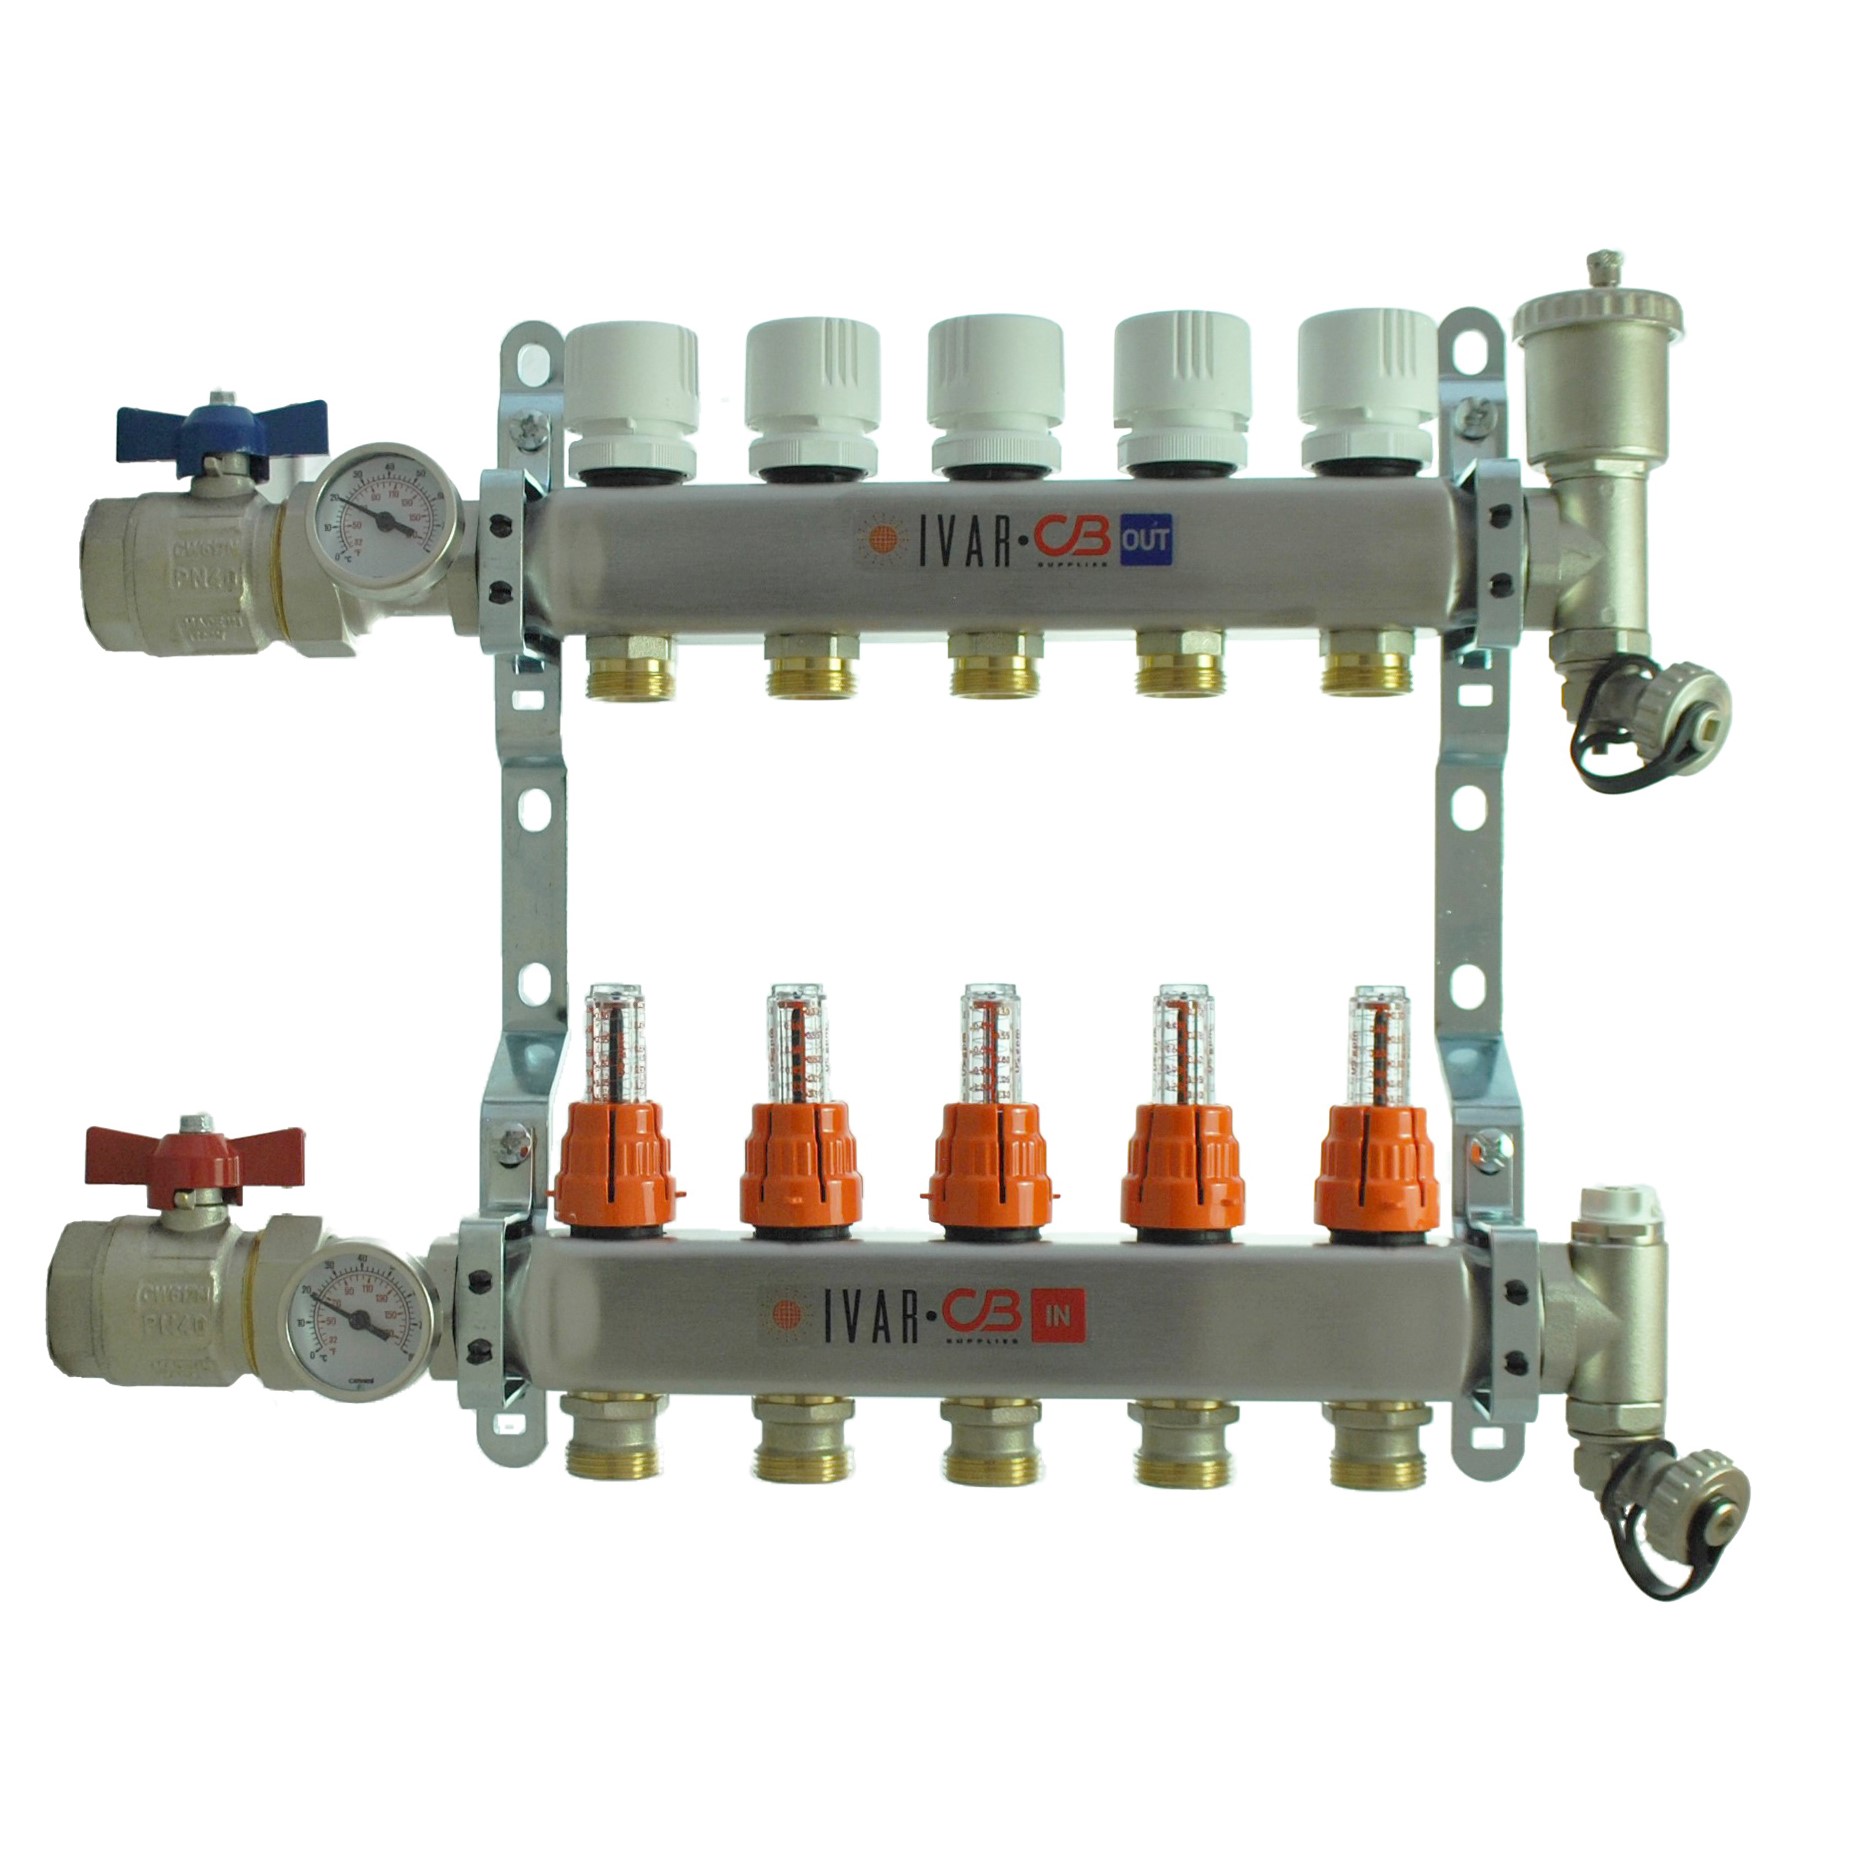 1\" IVAR Stainless Steel Hydronic Manifold for Radiant Floor Heating - 5 ports